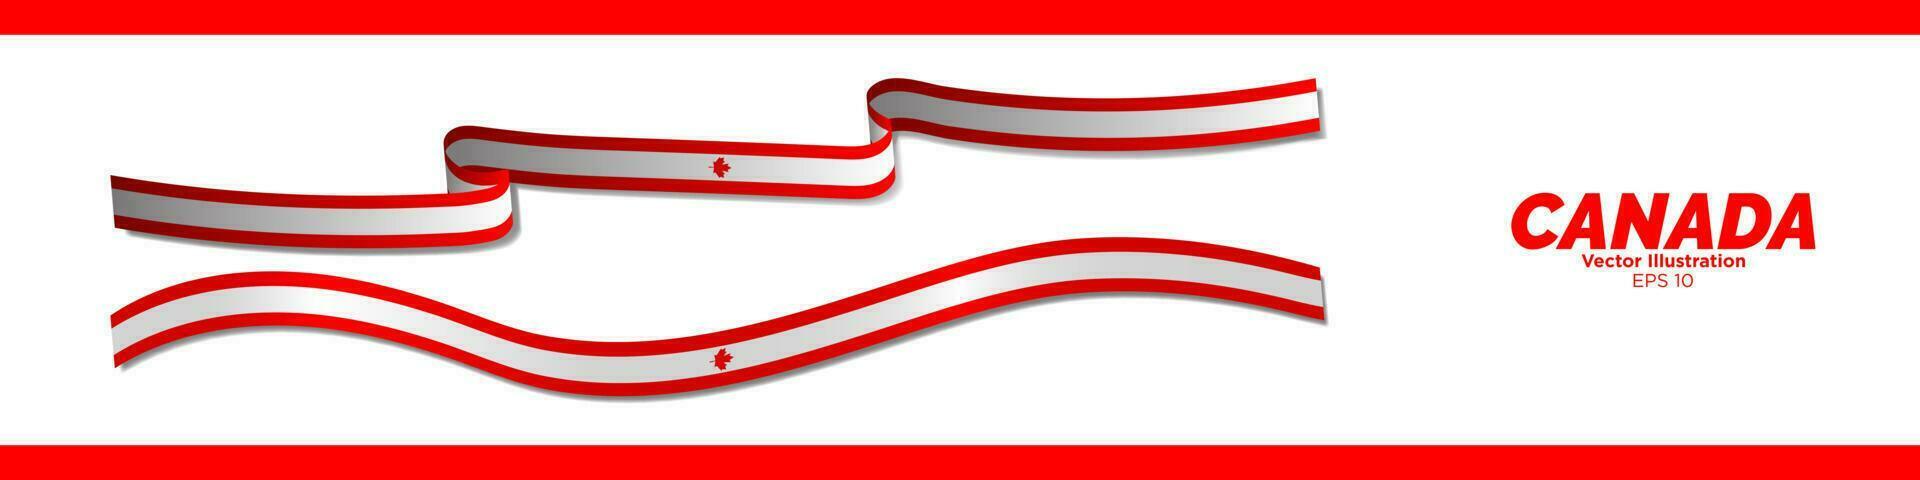 3d Rendered Canadian Flag Ribbons with shadows. Long Flag of Canada Set. Curled and rendered in perspective. Graphic Resource. Editable Vector Illustration.